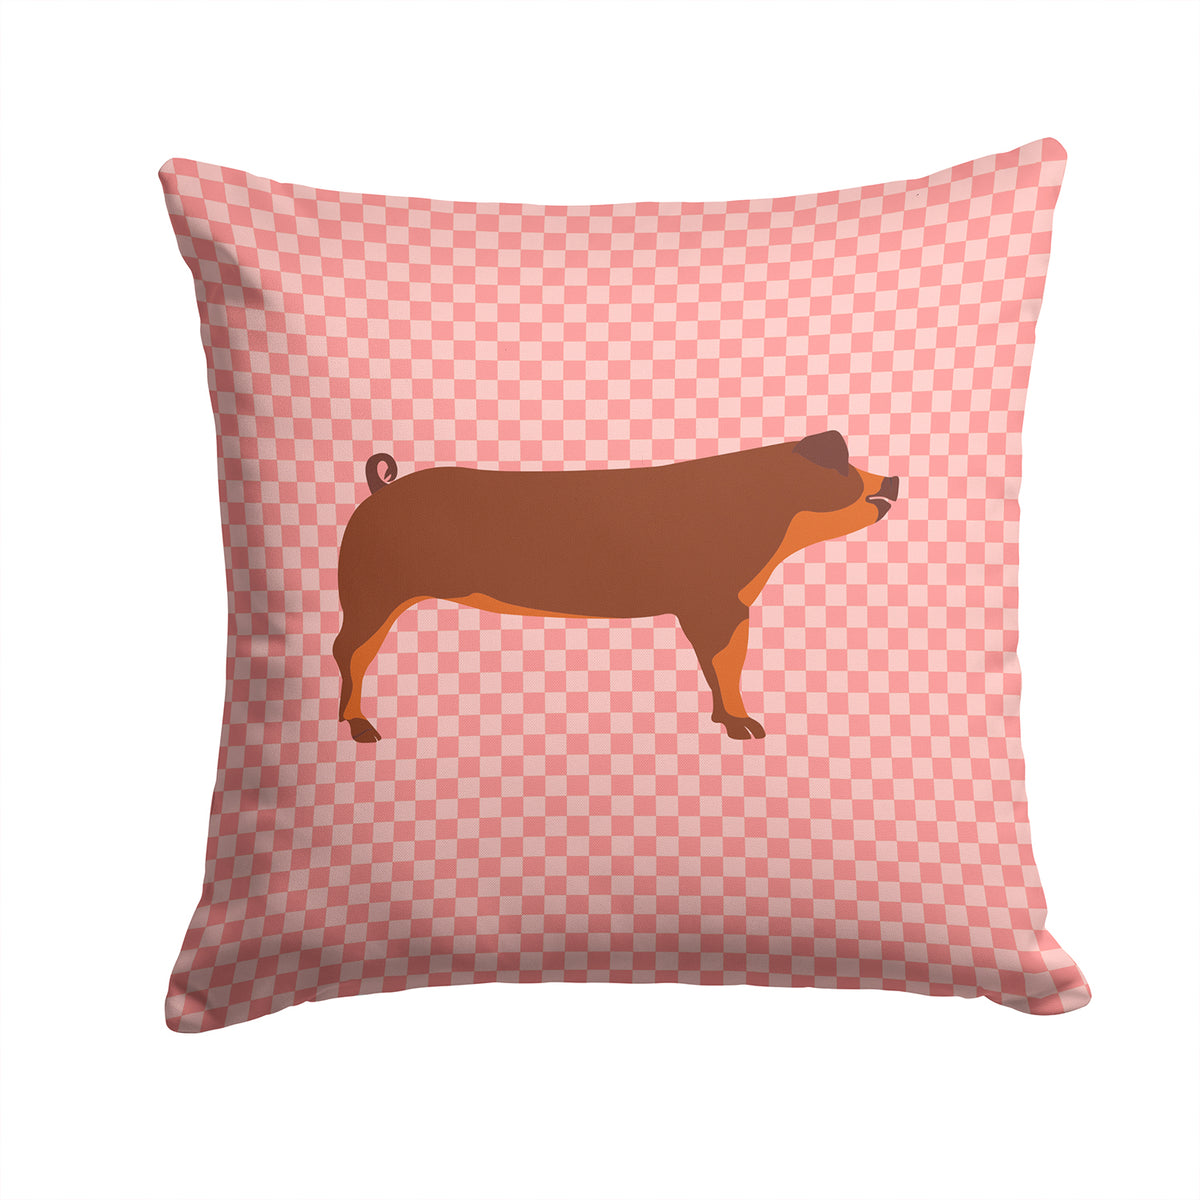 Duroc Pig Pink Check Fabric Decorative Pillow BB7942PW1414 - the-store.com